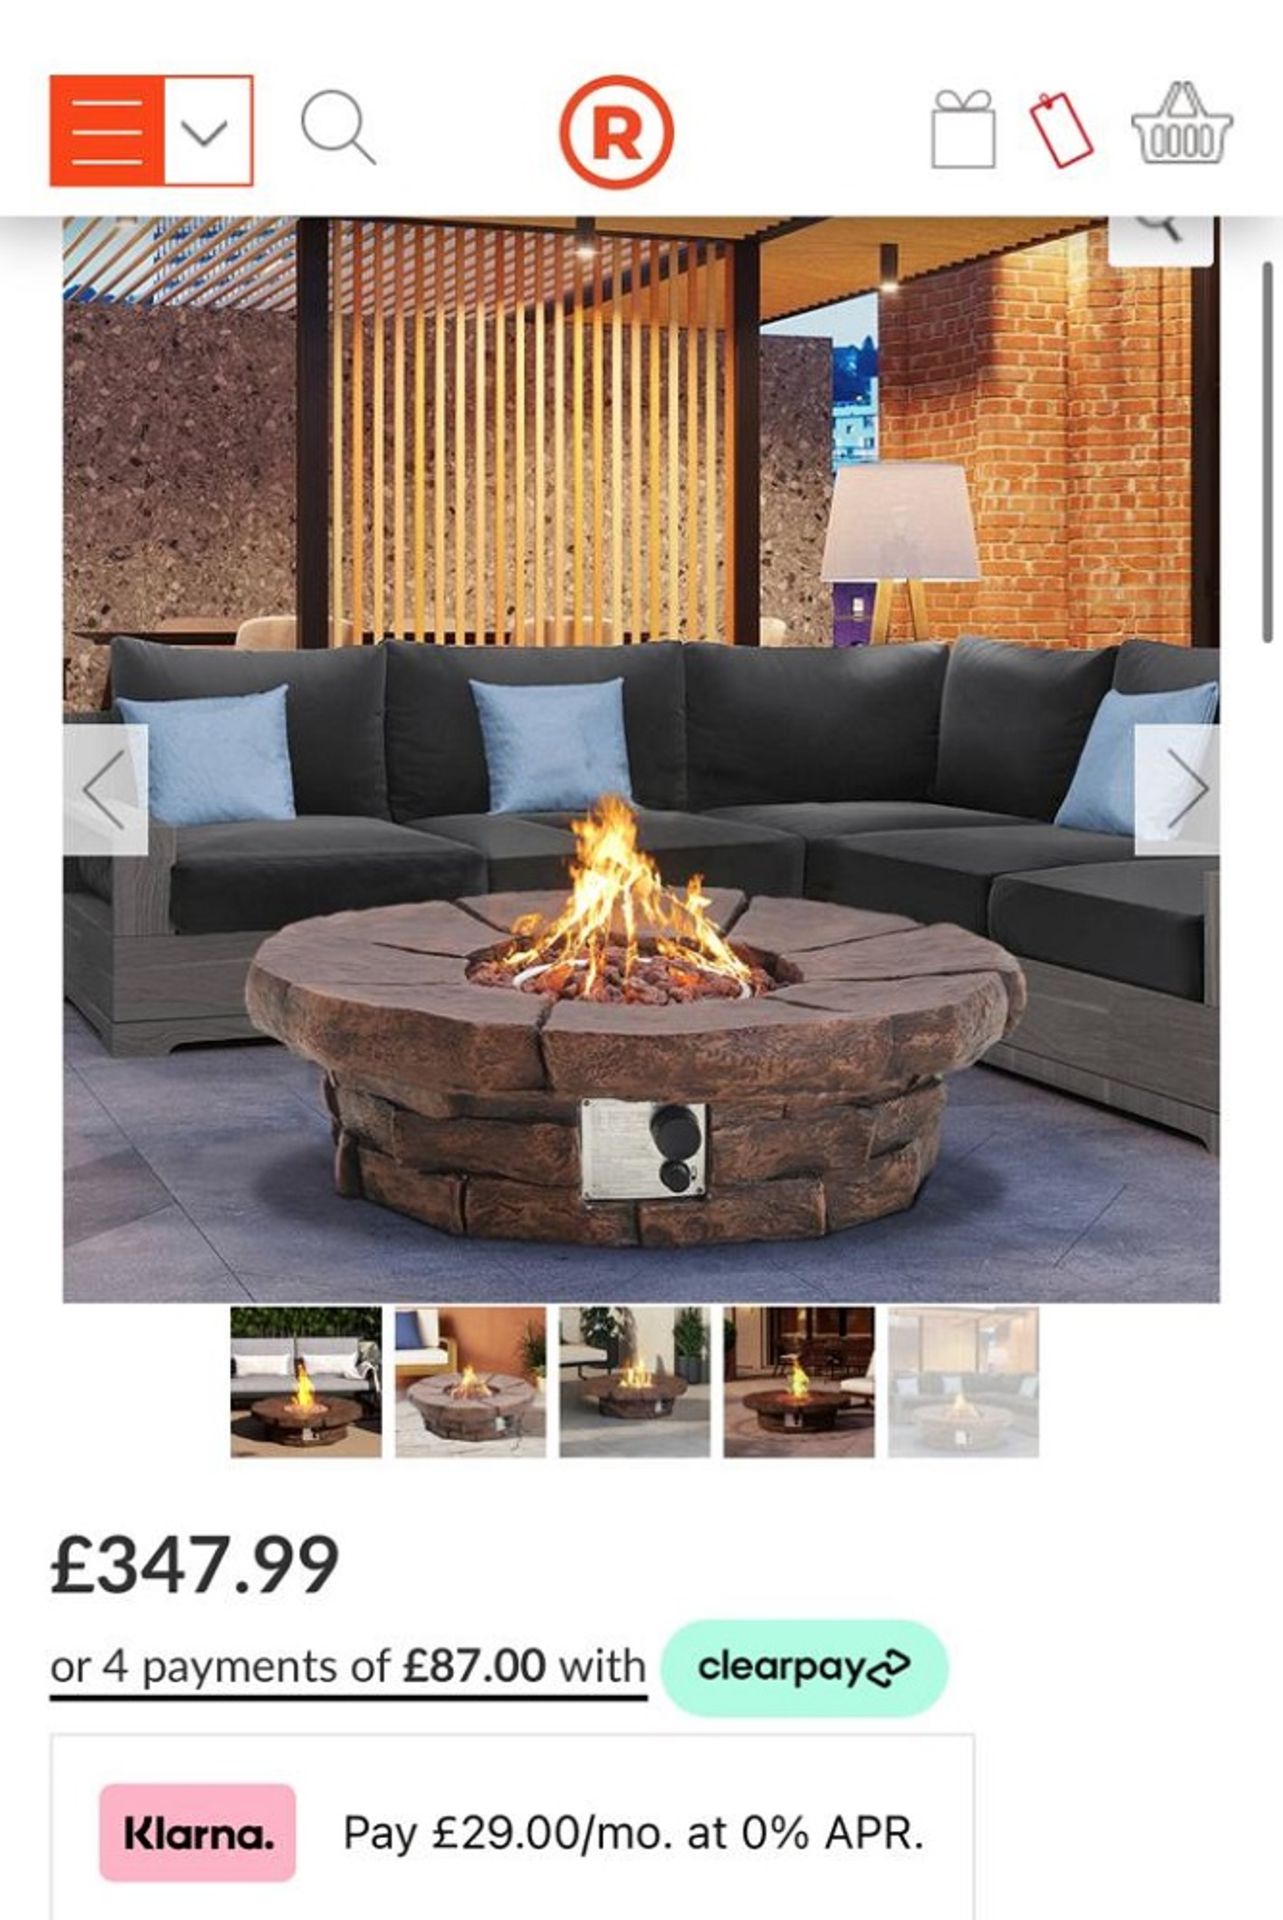 Brand New Large Round Gas Firepit Heater RRP £347 Stone Concrete Effect Outdoor Garden Patio Heater - Image 2 of 7